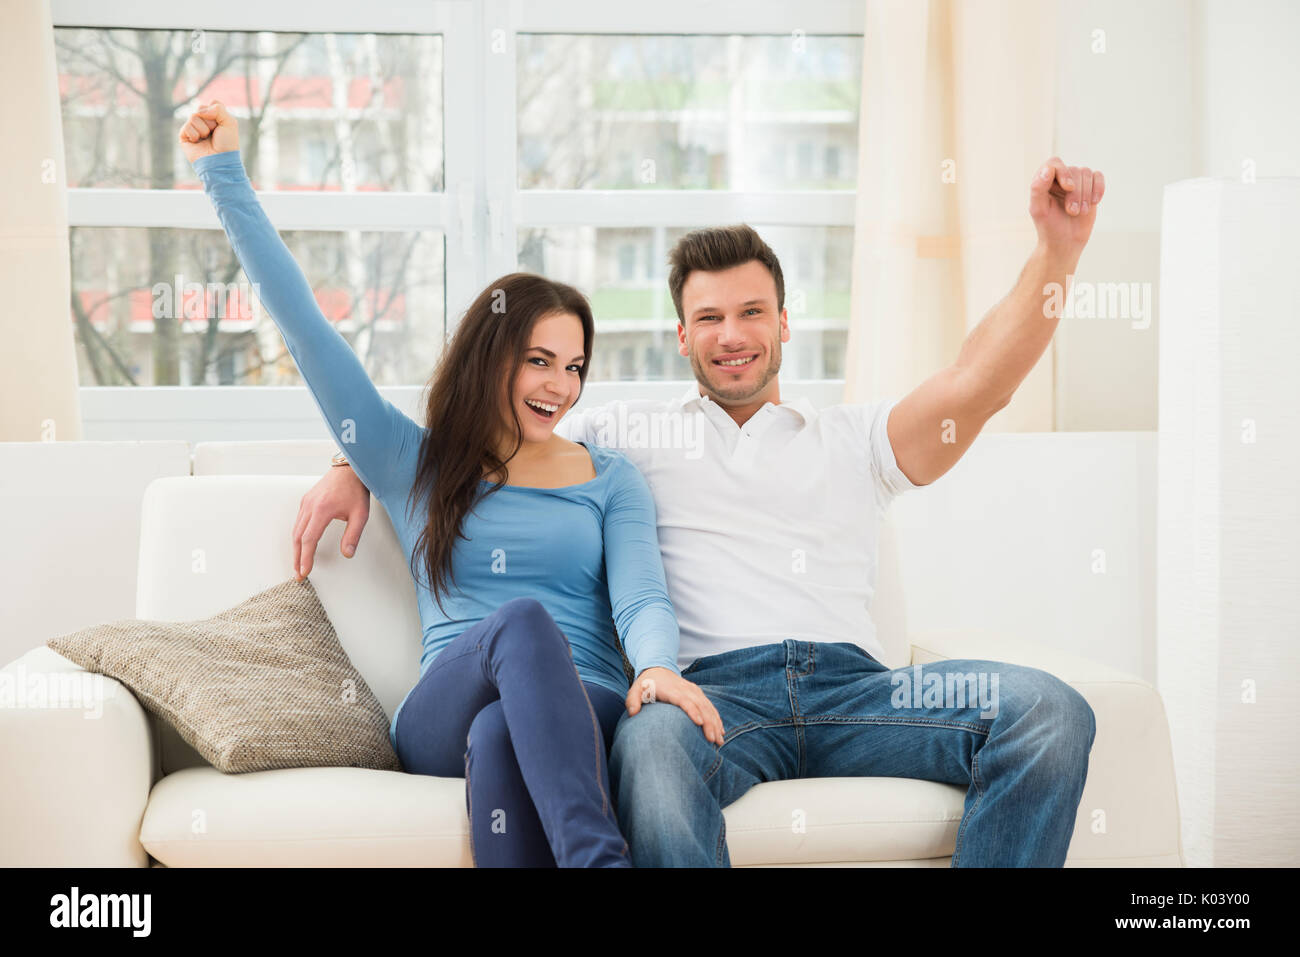 Portrait Of Ecstatic Couple Sitting On Couch At Home Stock Photo